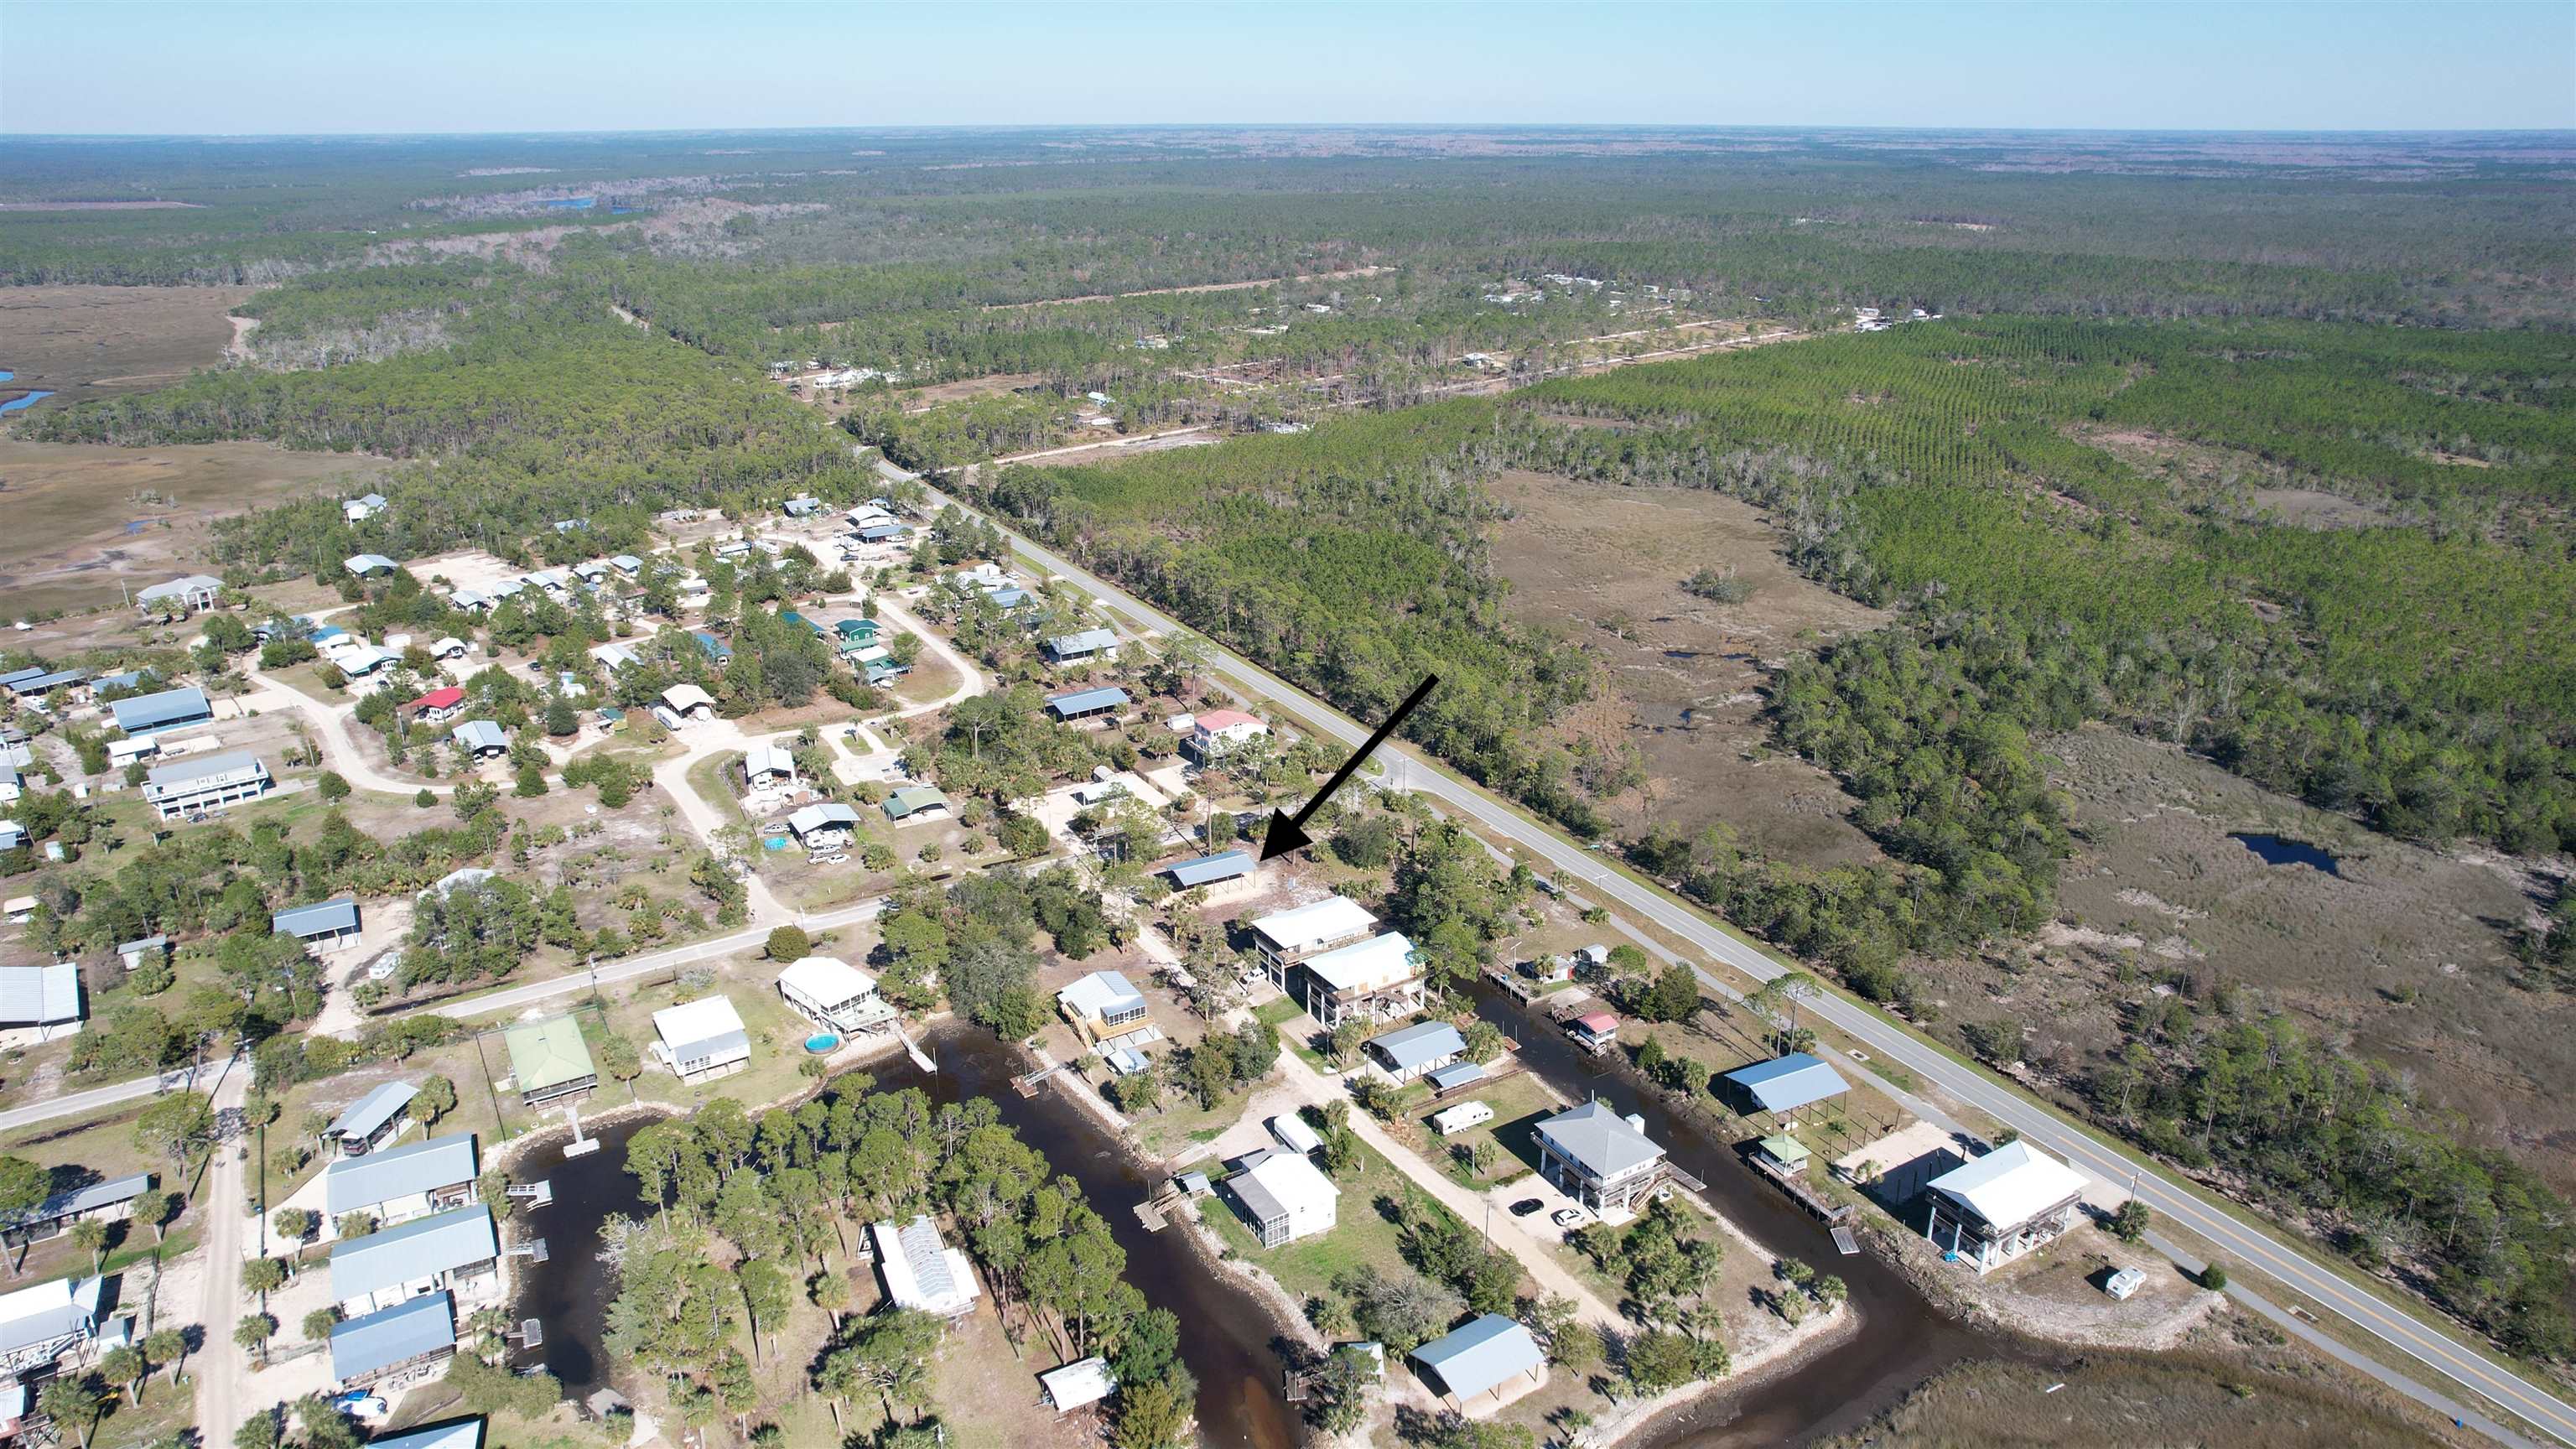 21420 Osprey,PERRY,Florida 32348,Lots and land,Osprey,366386